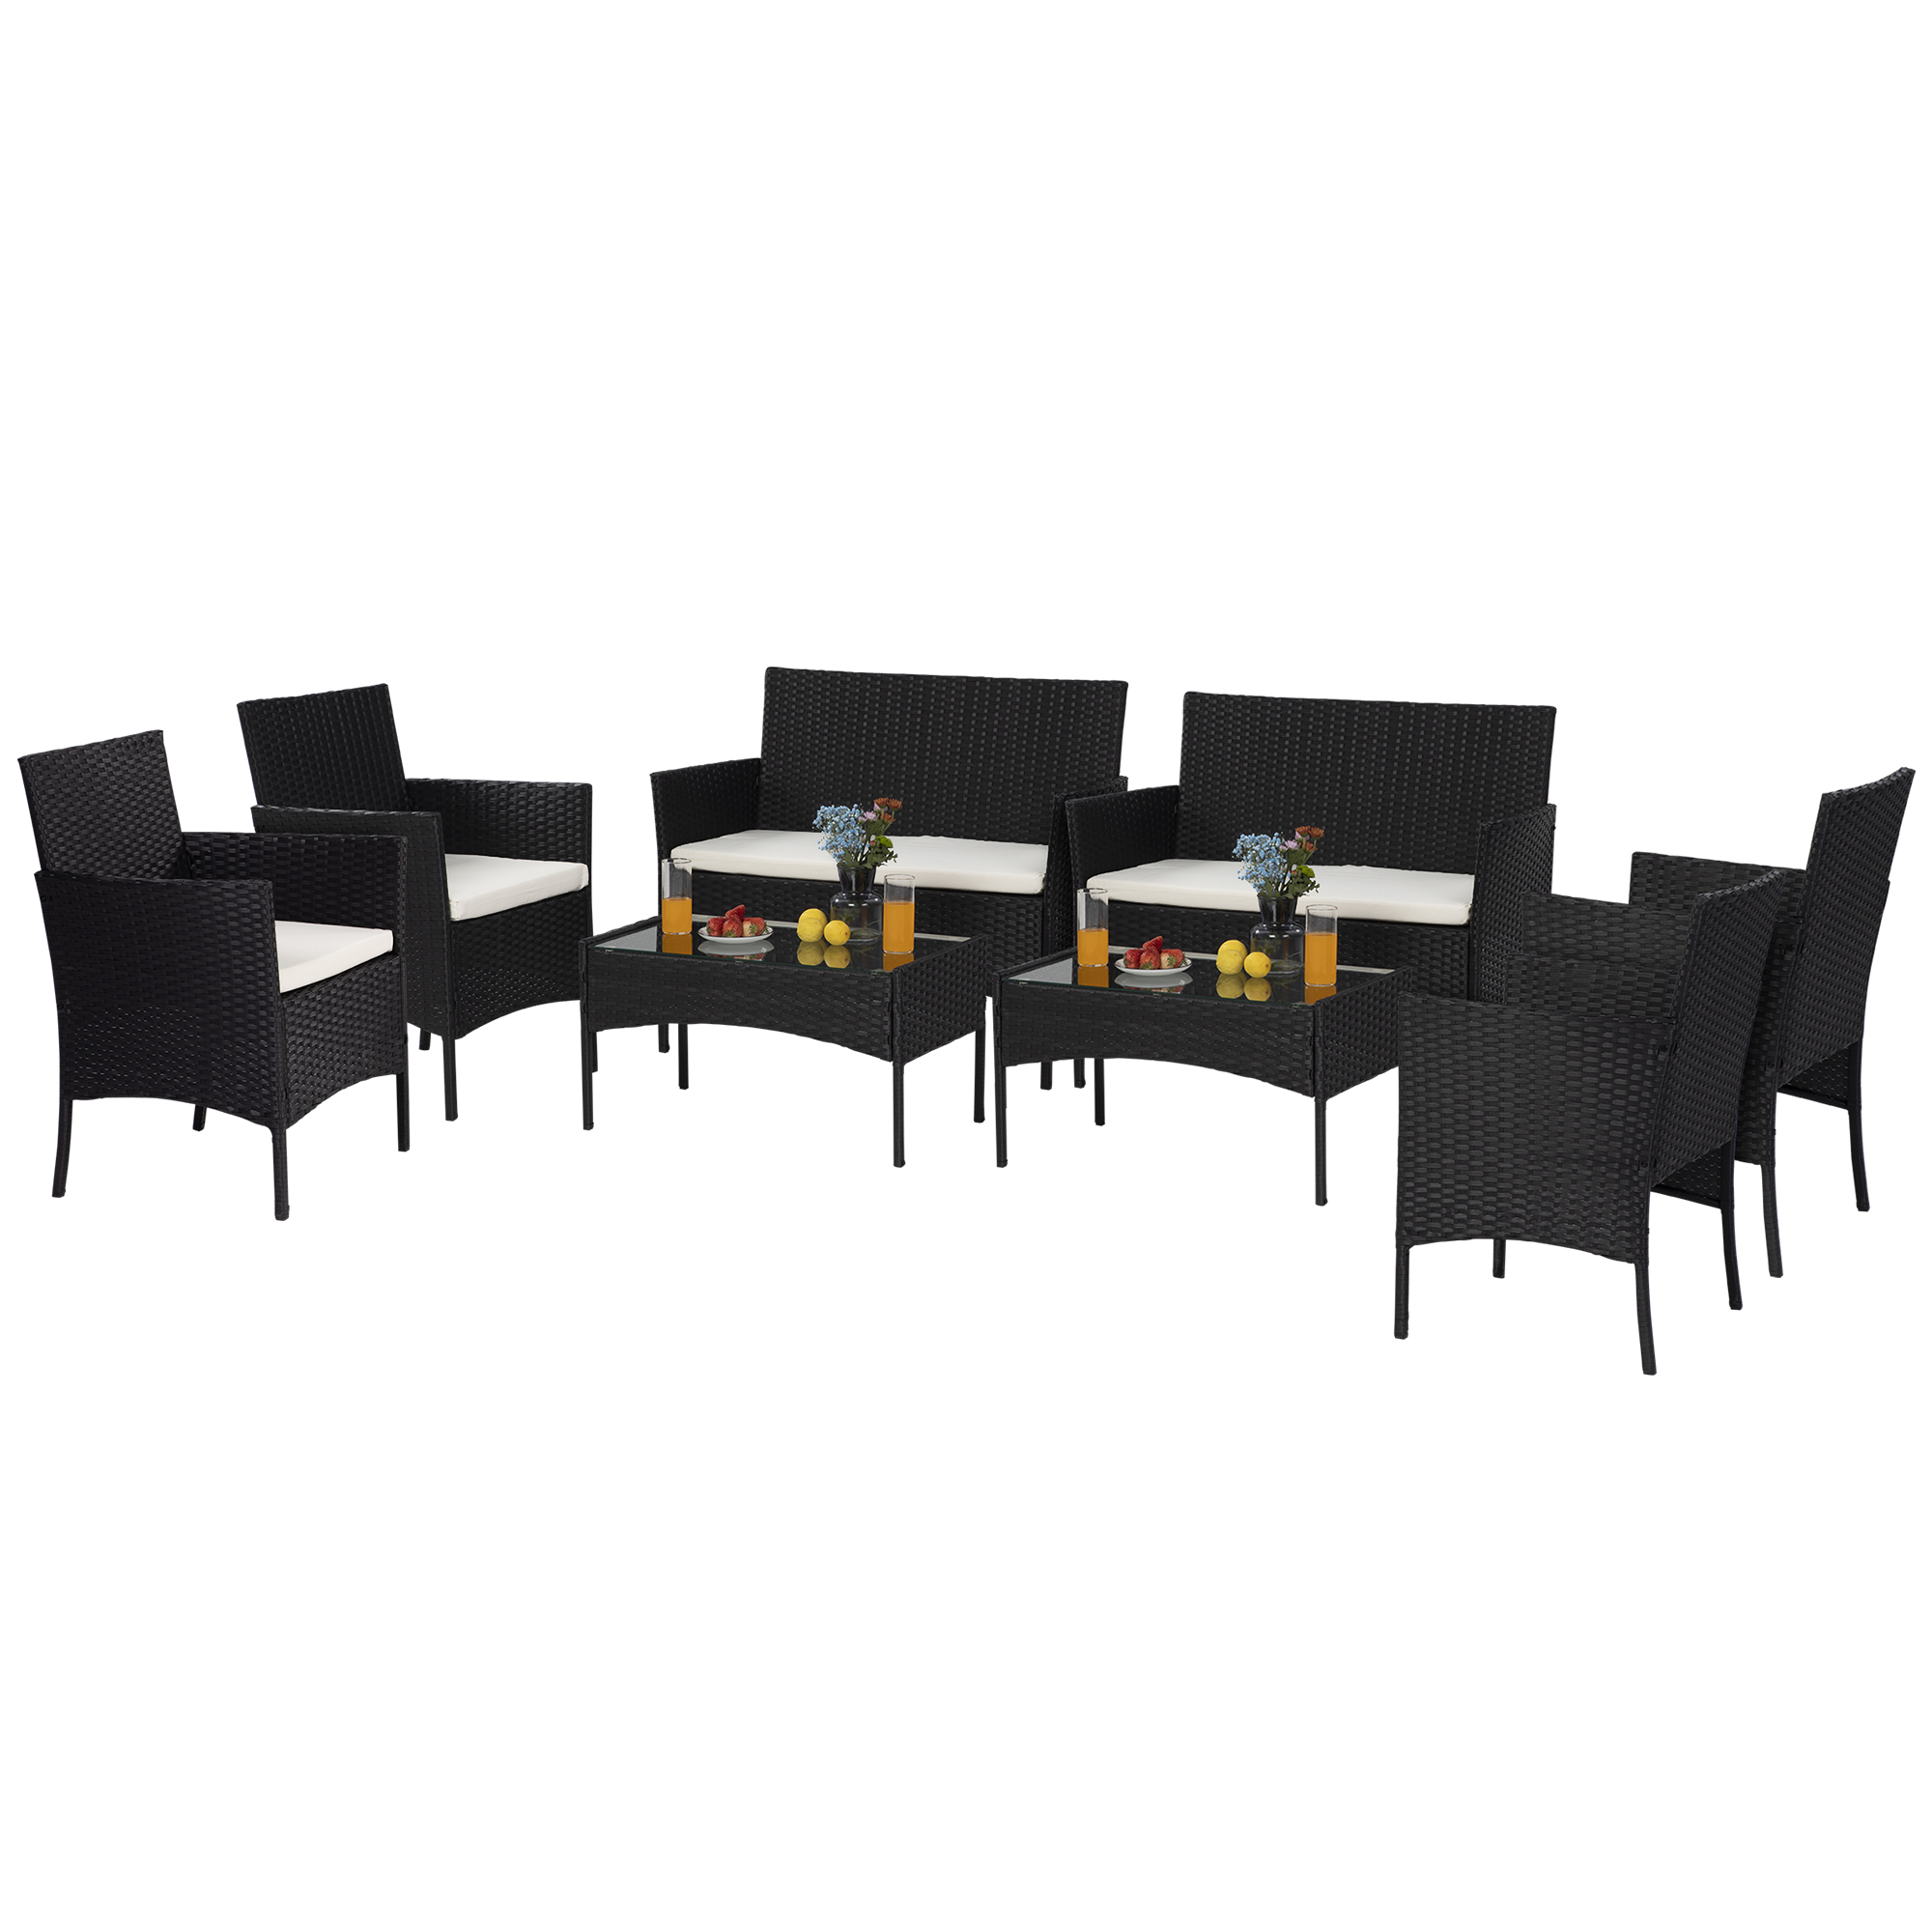 uhomepro 8-Piece Patio Bistro Set, Outdoor Furniture PE Rattan Wicker Patio Set, Porch Conversation Sets with Glass Coffee Table, Wicker Chair Set for Backyard Garden Lawn Poolside, Black - image 3 of 12